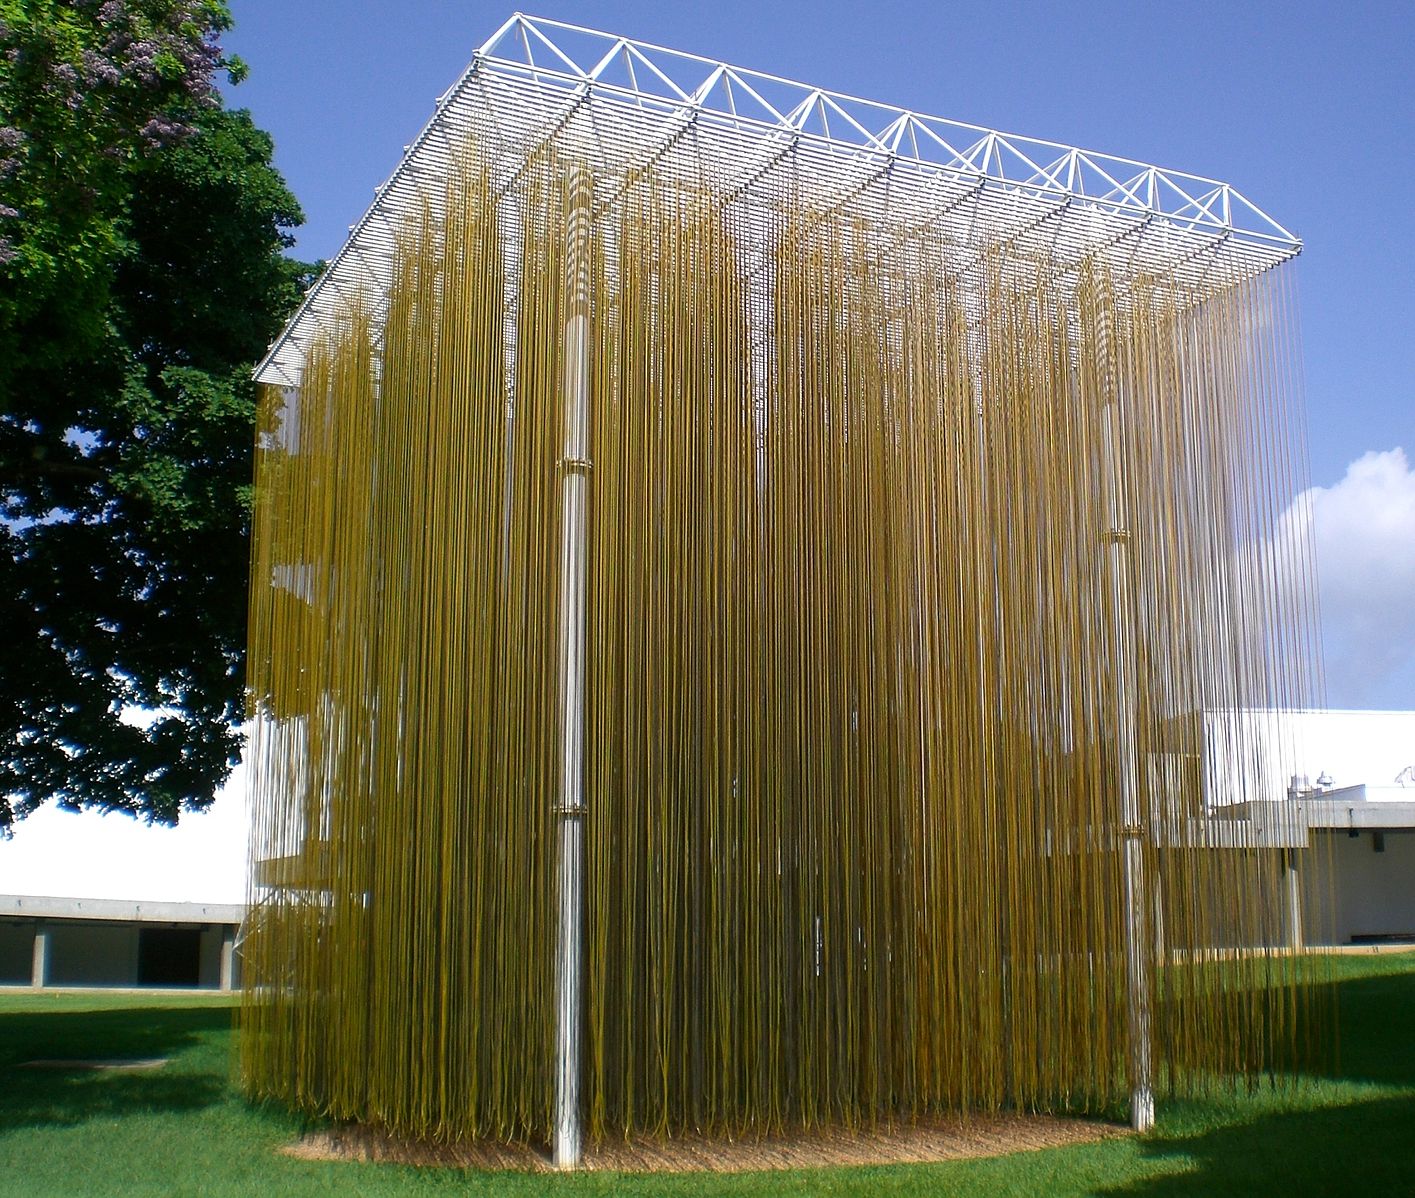 A large metal sculpture with a box frame and nylon tubes hanging down in the center